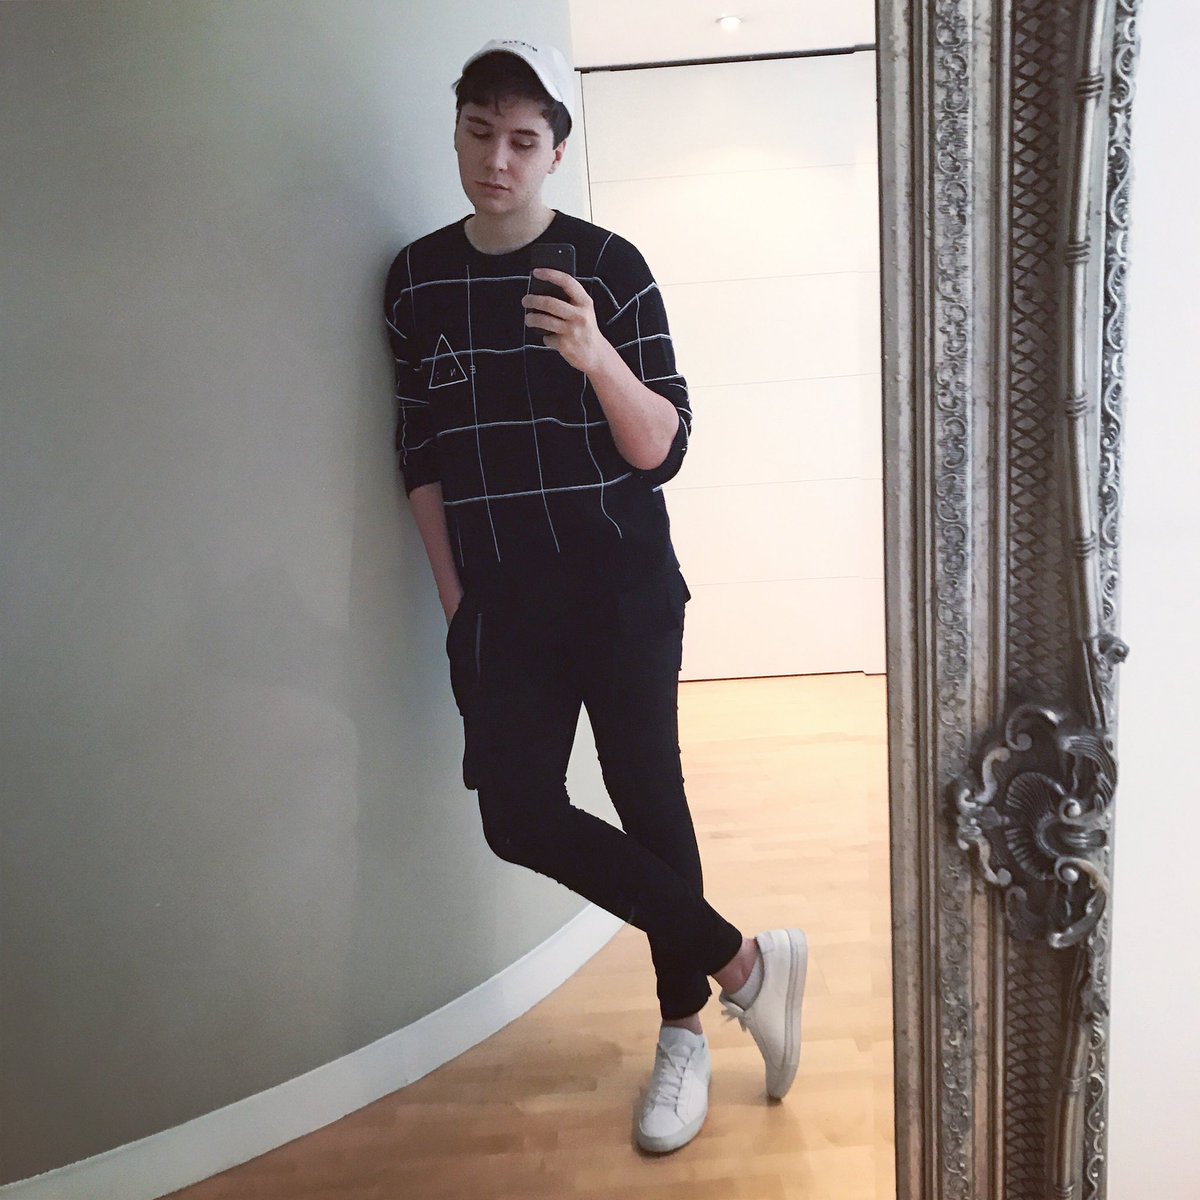 #25 Wimbledon Fit (18.6%) - That one time instagram took Dan and Phil to see a fancy tennis game and forced them to give us content <3